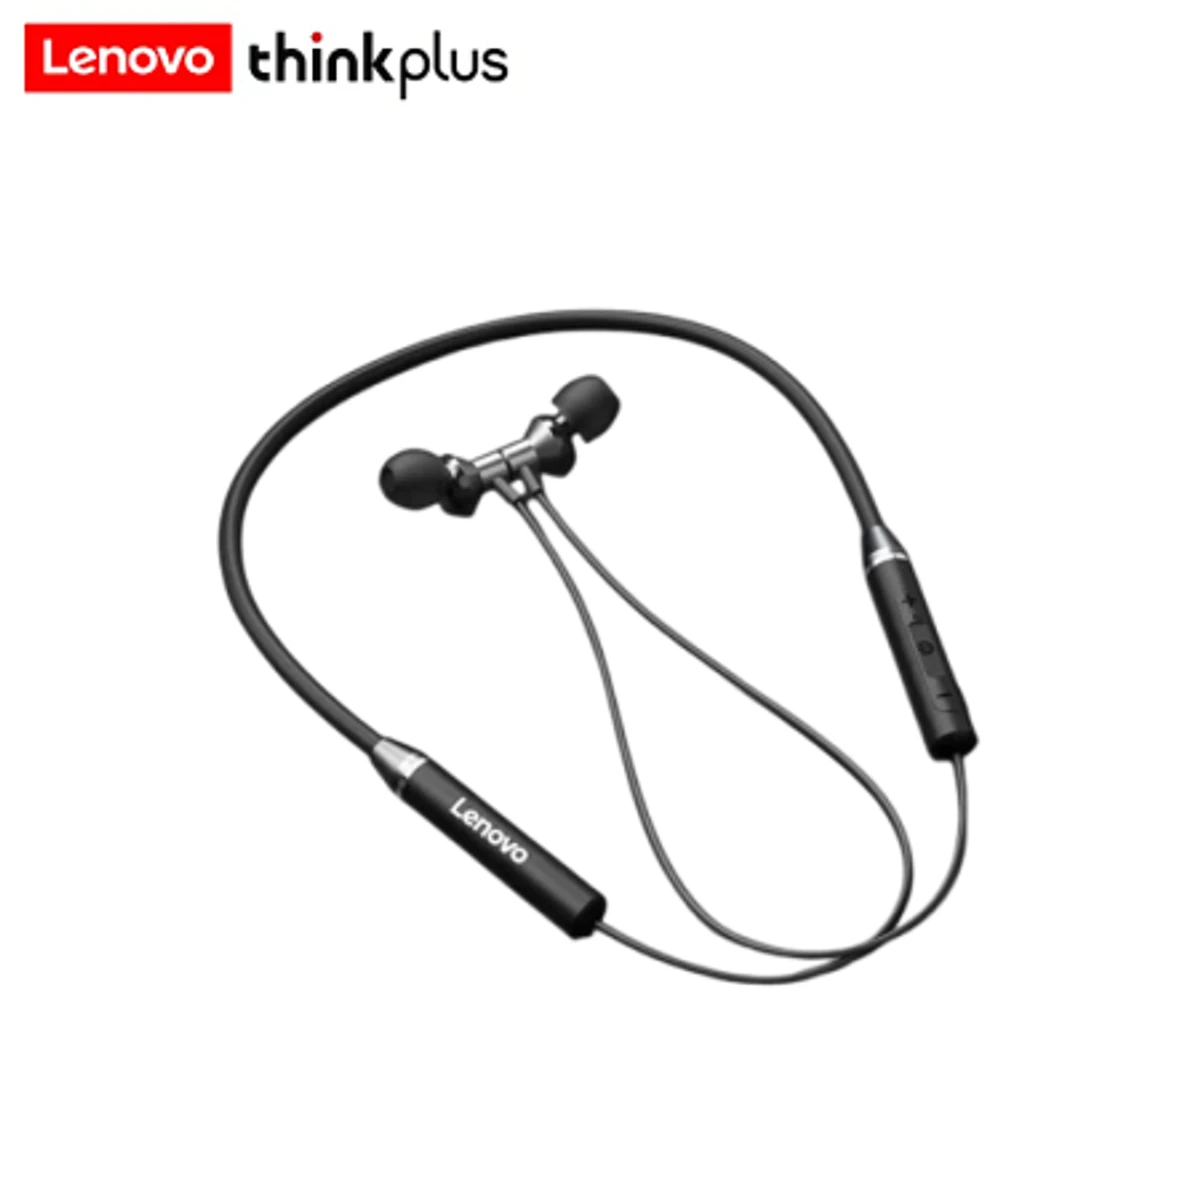 Bluetooth Wireless Earbuds Magnetic Neckband Earphones IPX5 Waterproof Sport Headset with Noise Cancelling Mic HE05 For Lenovo